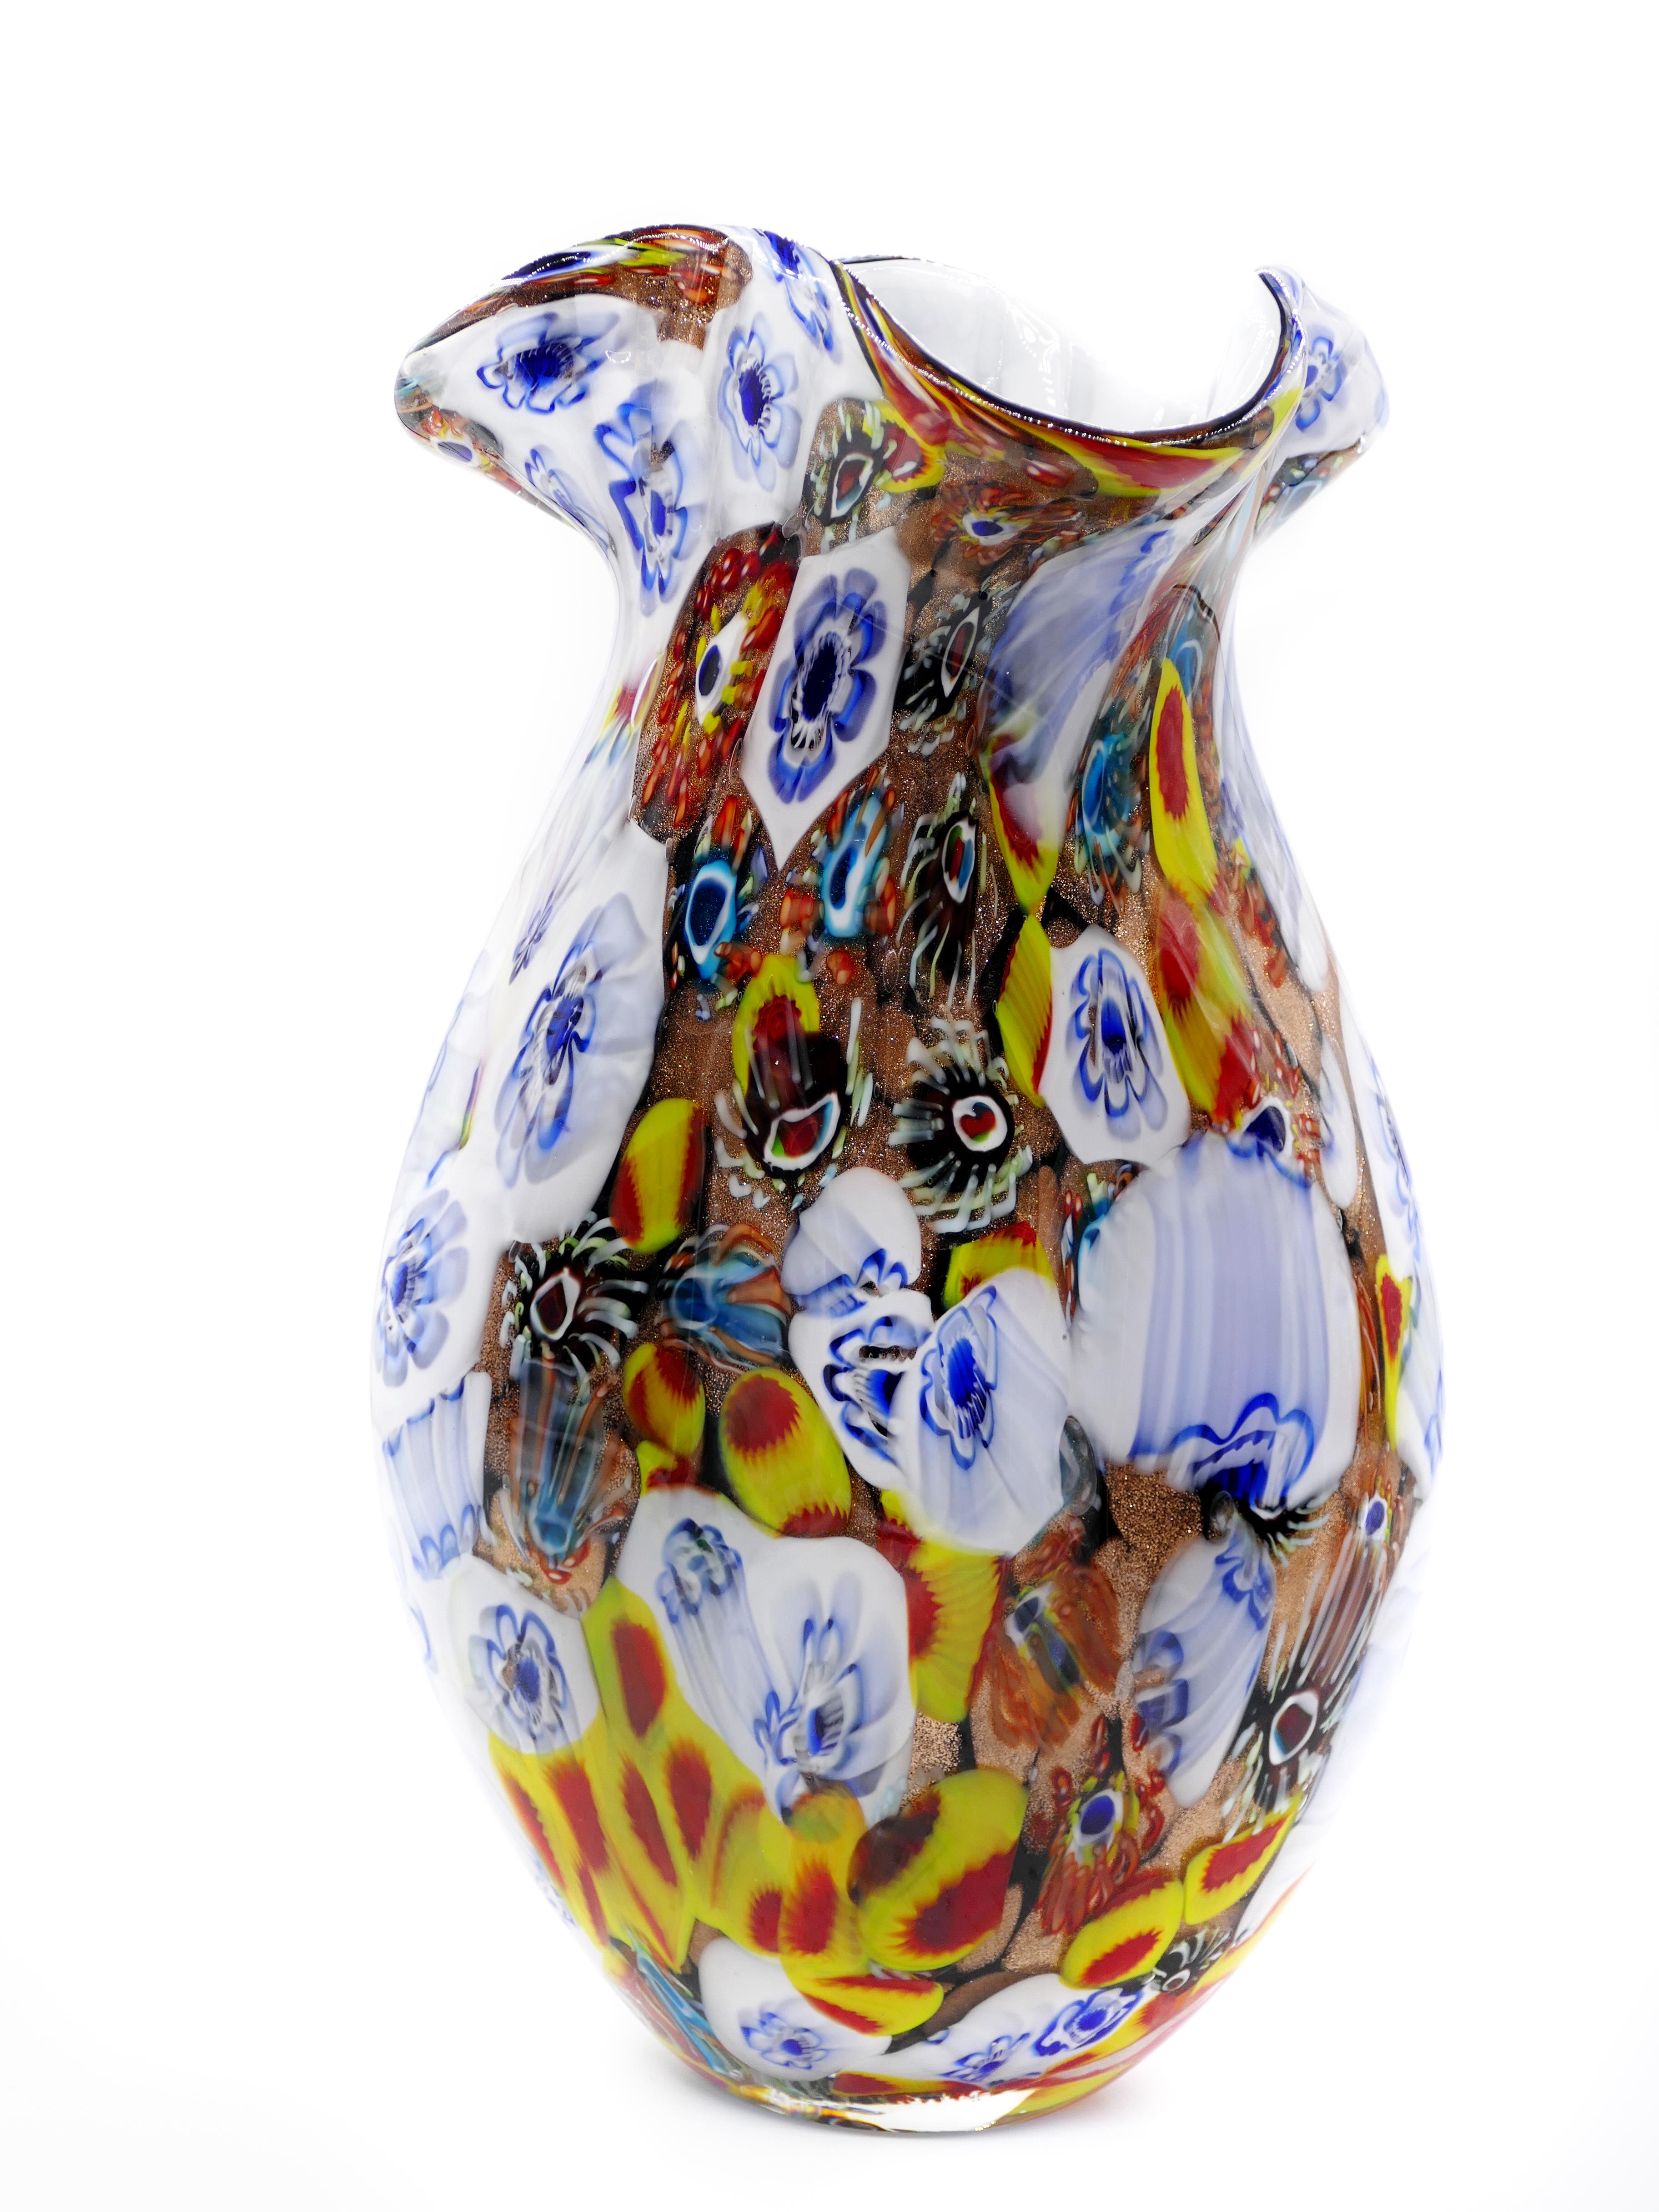 This is a melting glass vase, a wonderful decorative object with a particular surface (color melts and blue flowers) realized in 20th century, with an elegant sinuous design.

A colorful vase, in perfect conditions: as good as new, absolutely to